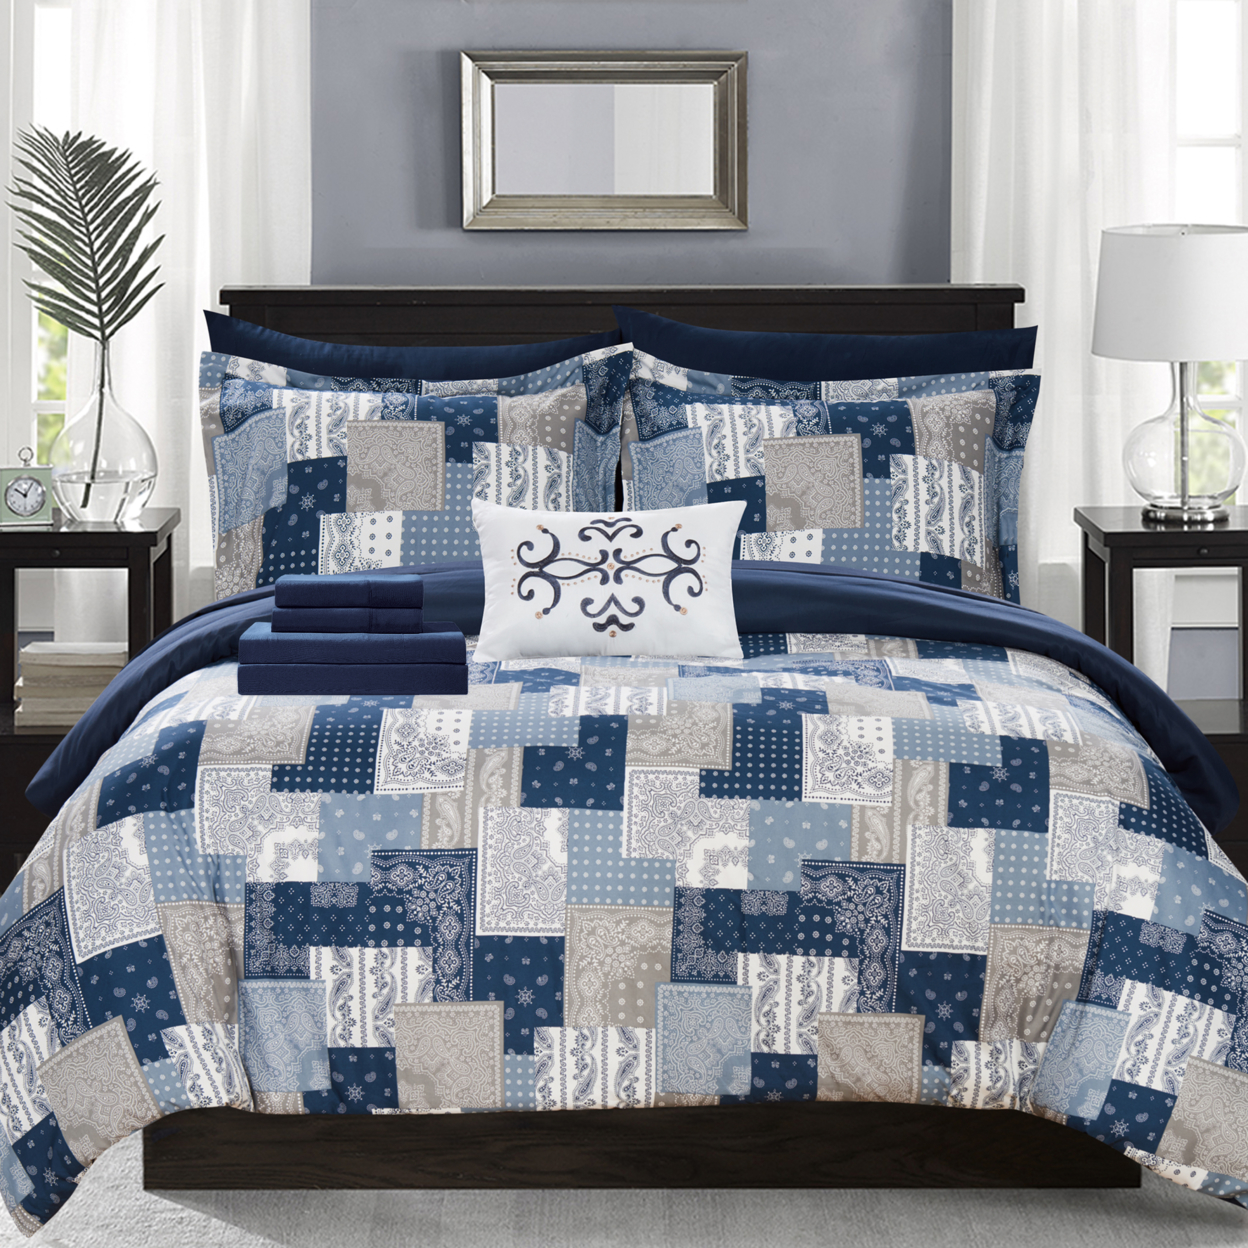 Dei 8 Or 6 Piece Reversible Comforter Set Patchwork Bohemian Paisley Print Design Bed In A Bag - Blue, Queen